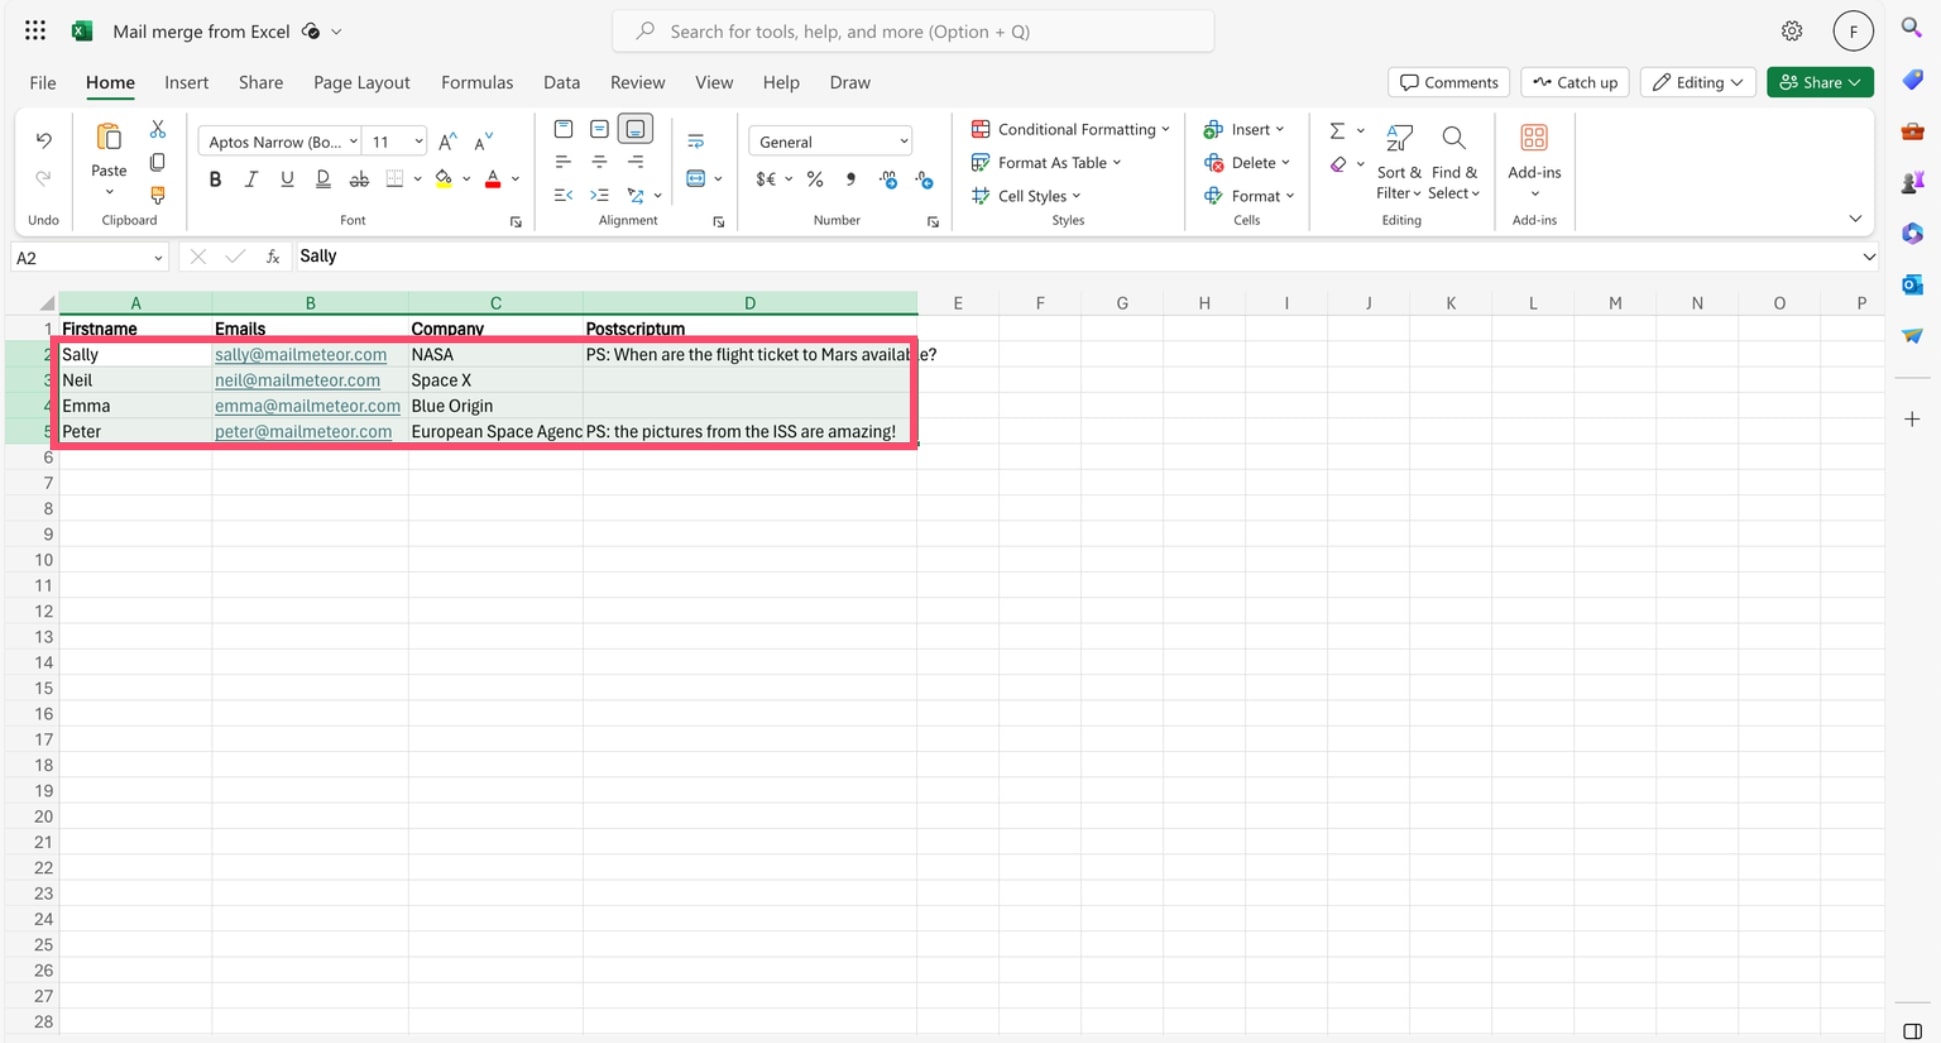 Add some recipients to your Excel mail merge